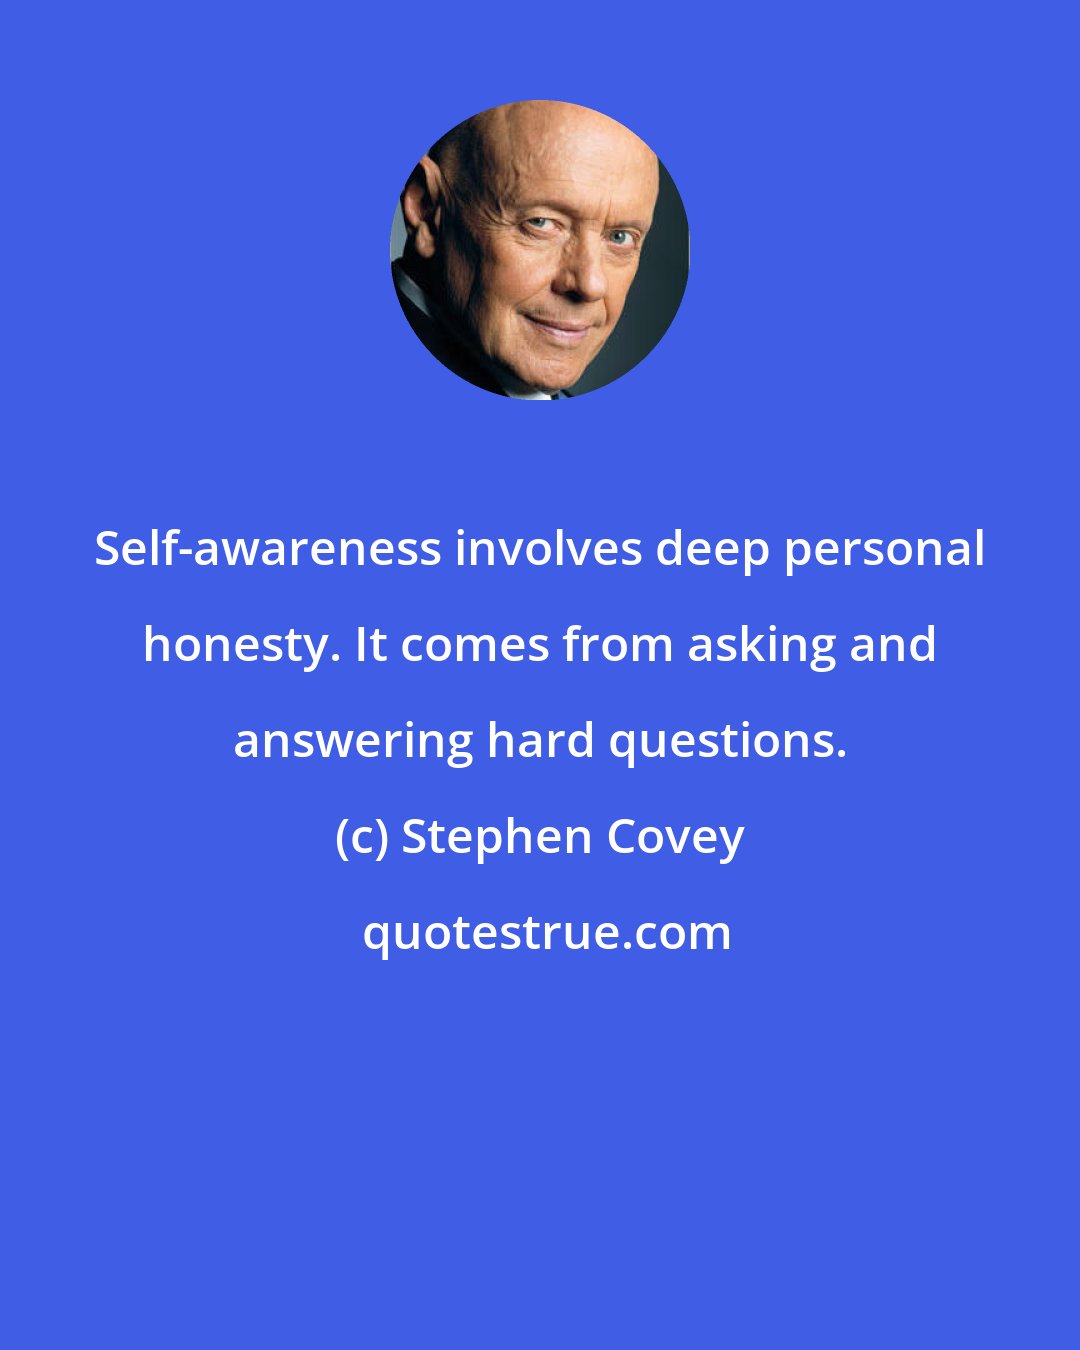 Stephen Covey: Self-awareness involves deep personal honesty. It comes from asking and answering hard questions.